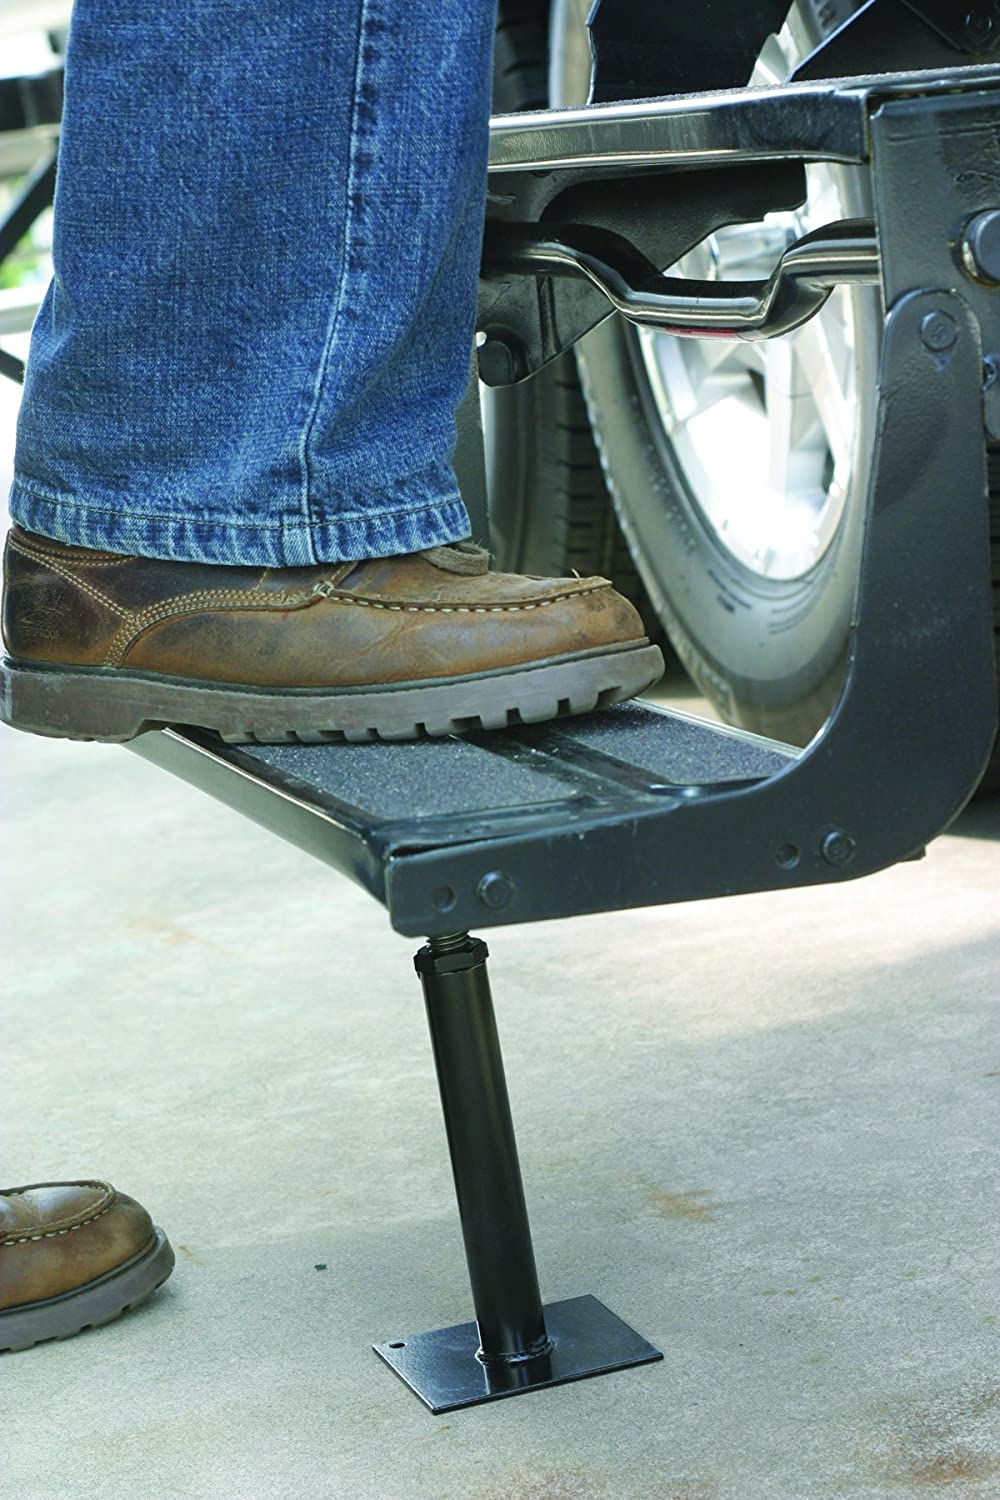 CAMCO 43671 Self Stor RV Step Brace | Provides Additional RV Step Stability | 1,000lb Weight Rating